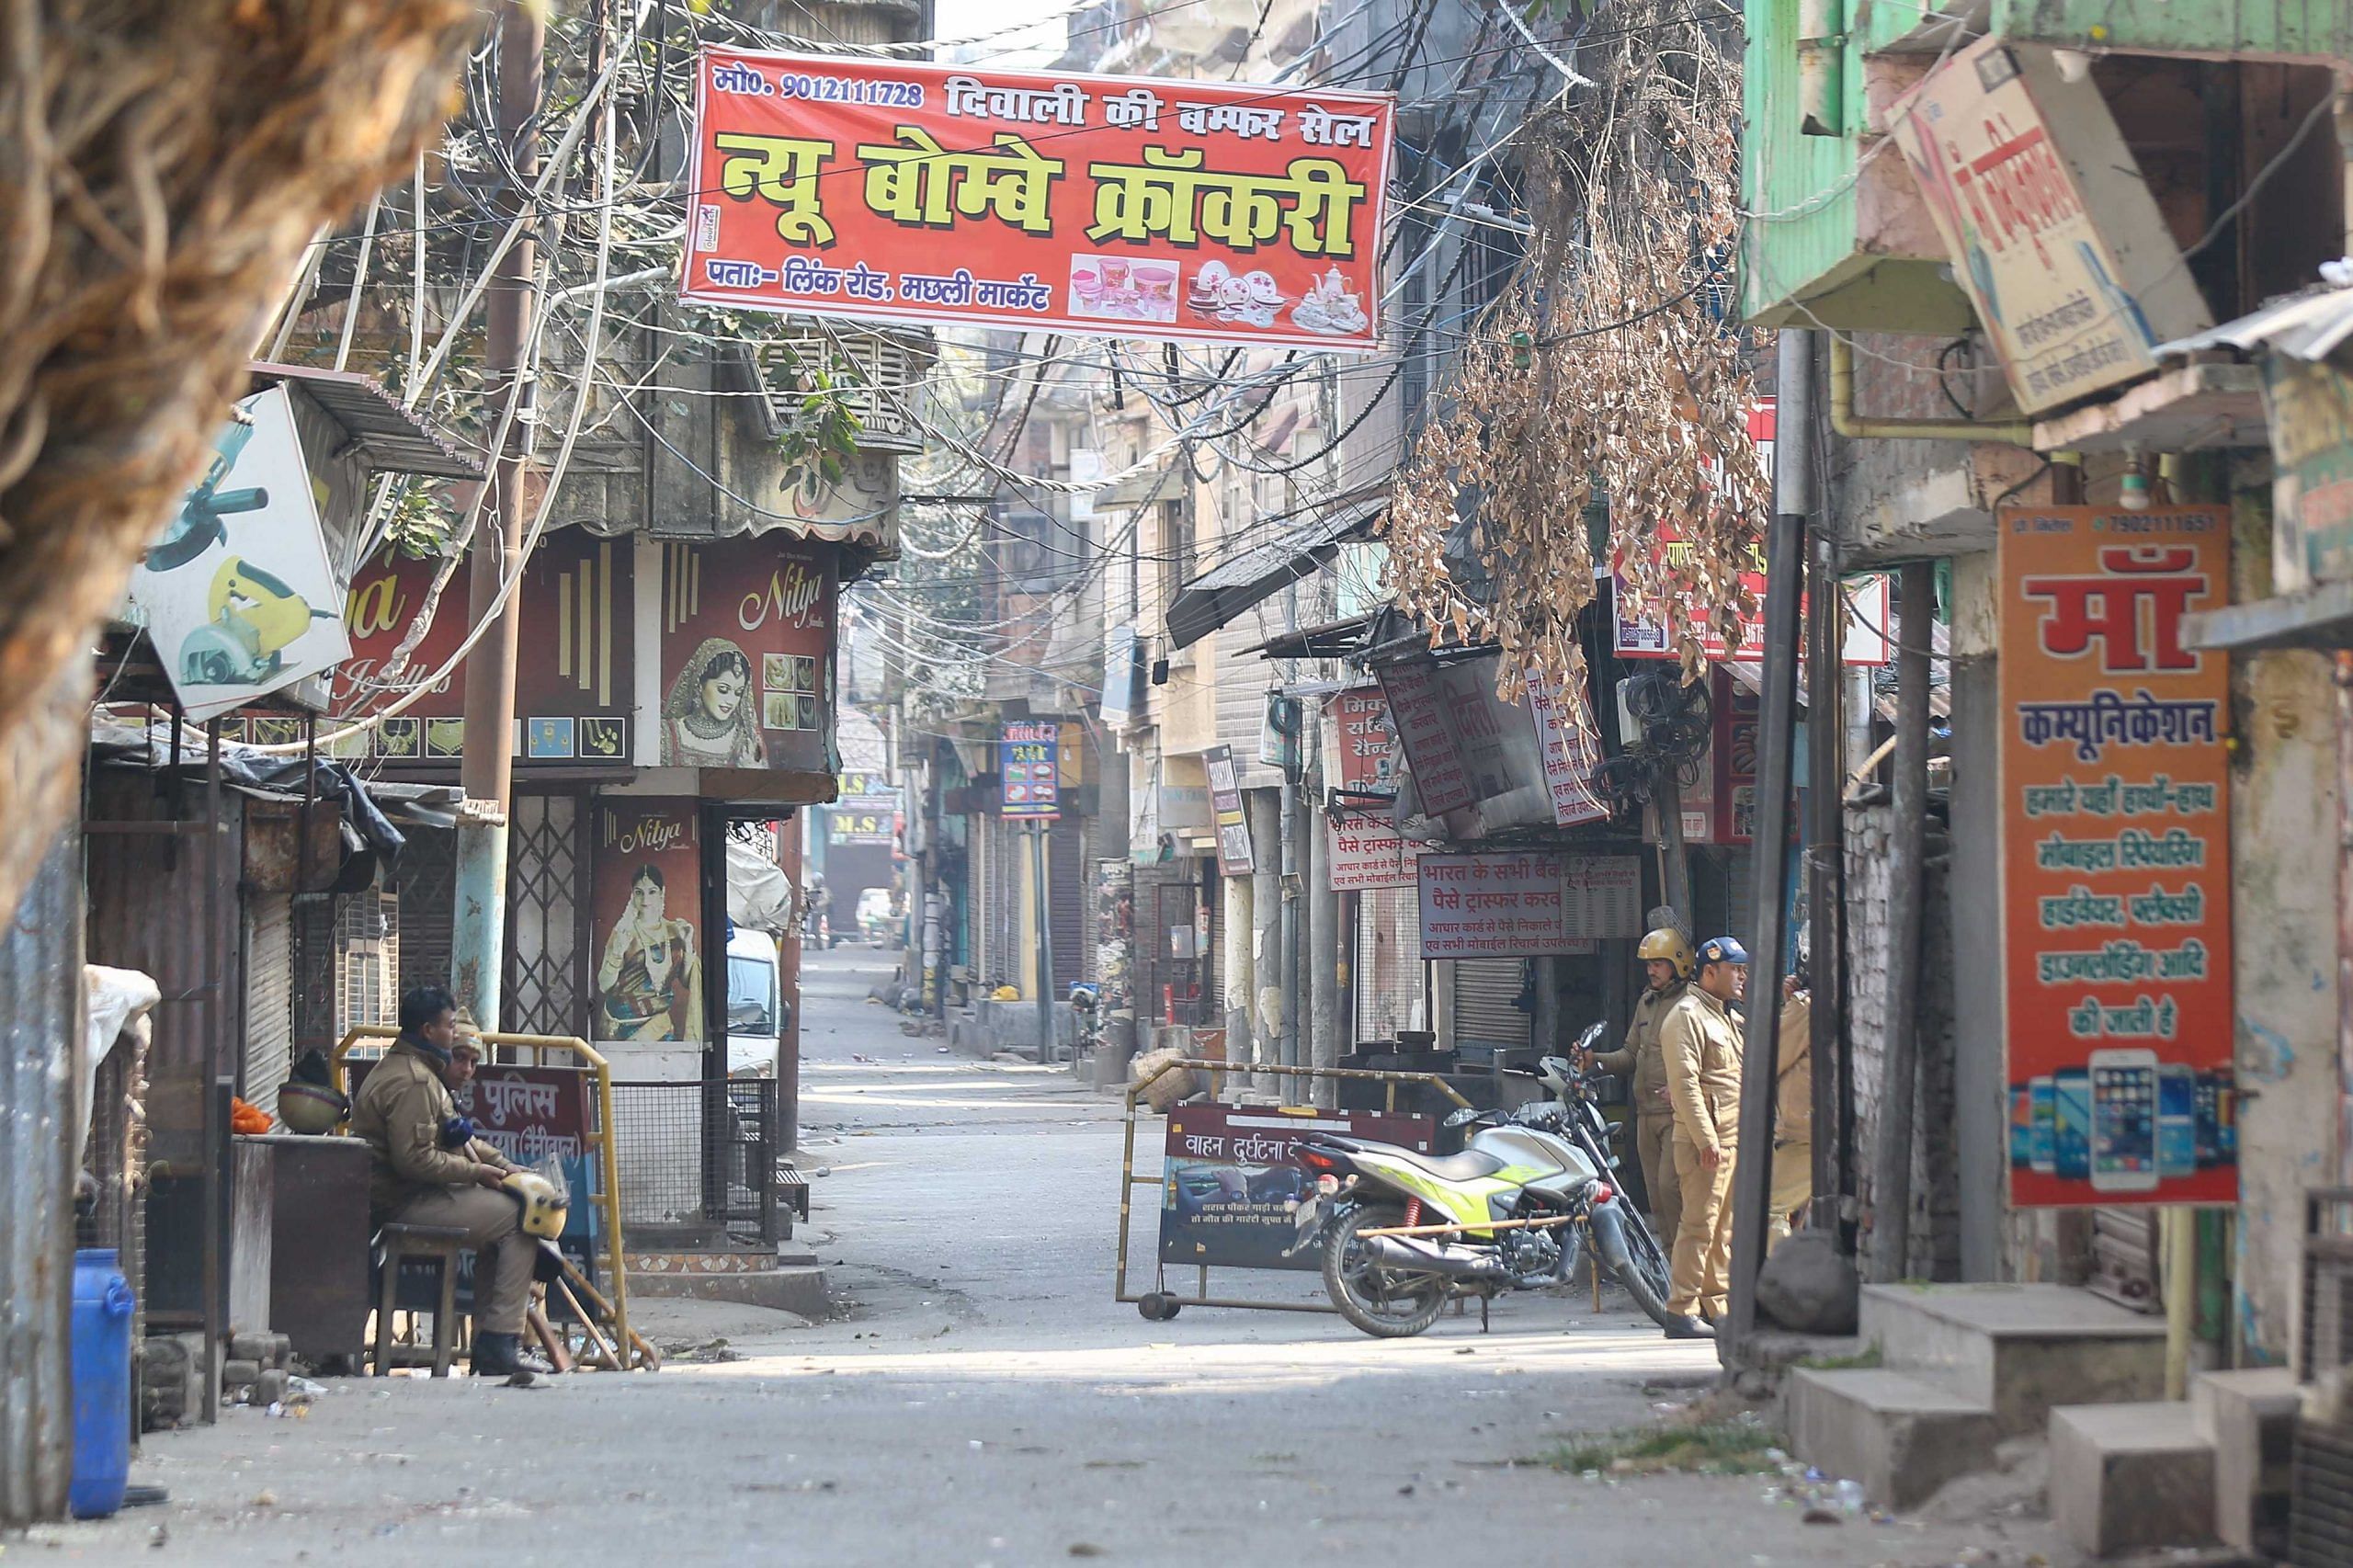 Curfew was imposed in Banbhoolpura after the violence | Suraj Singh Bisht | ThePrint